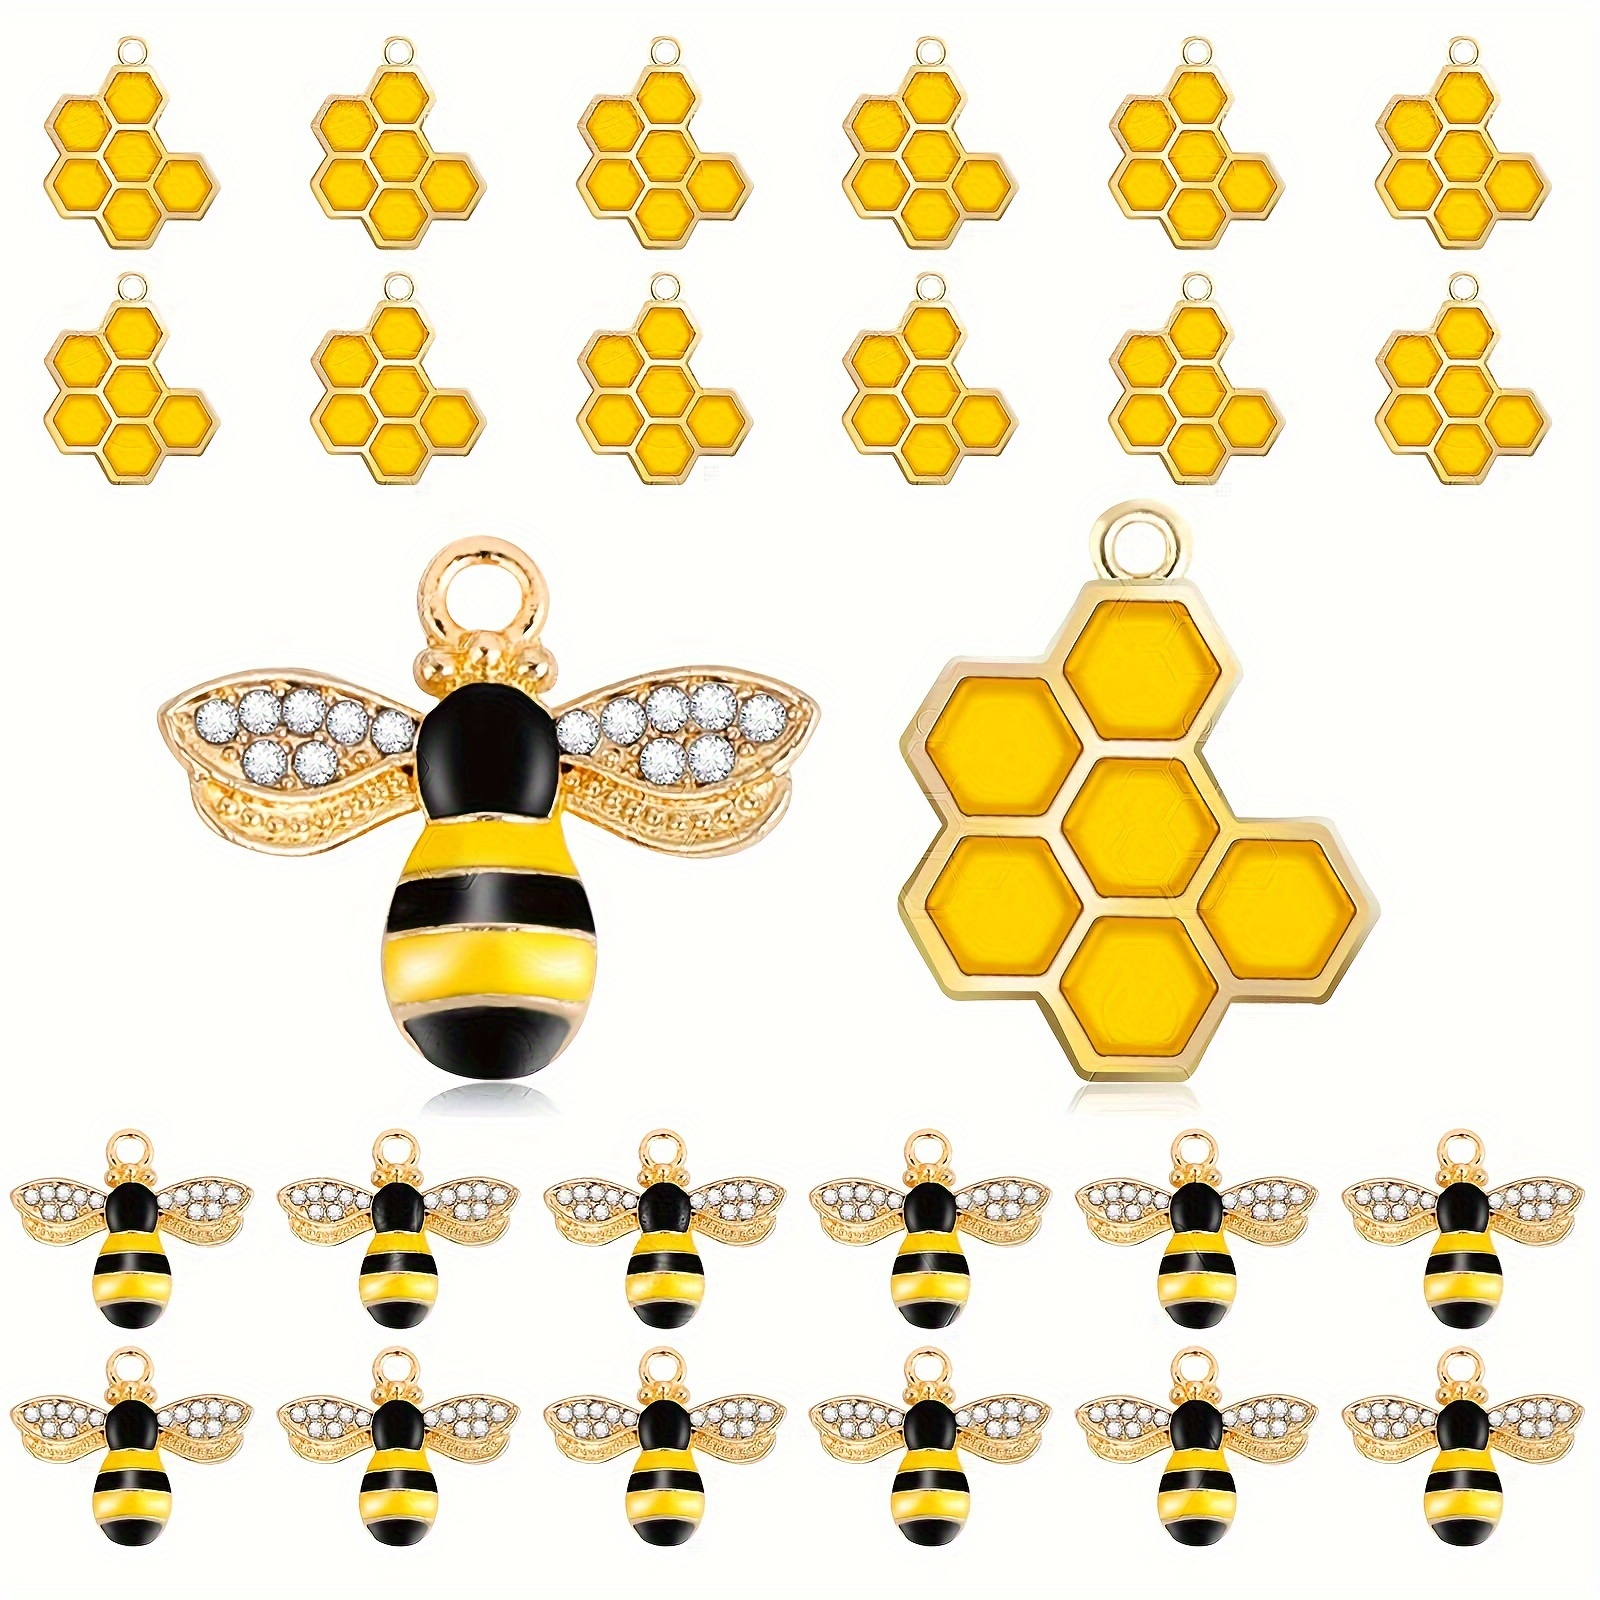 

30/60 Pieces Alloy Bee Charms Honeycomb Charms Mini Honeycomb Charms For Jewelry Making Rhinestone Bee Cute Charms For Diy Pendant Charms Earrings Keychains Making Supplies